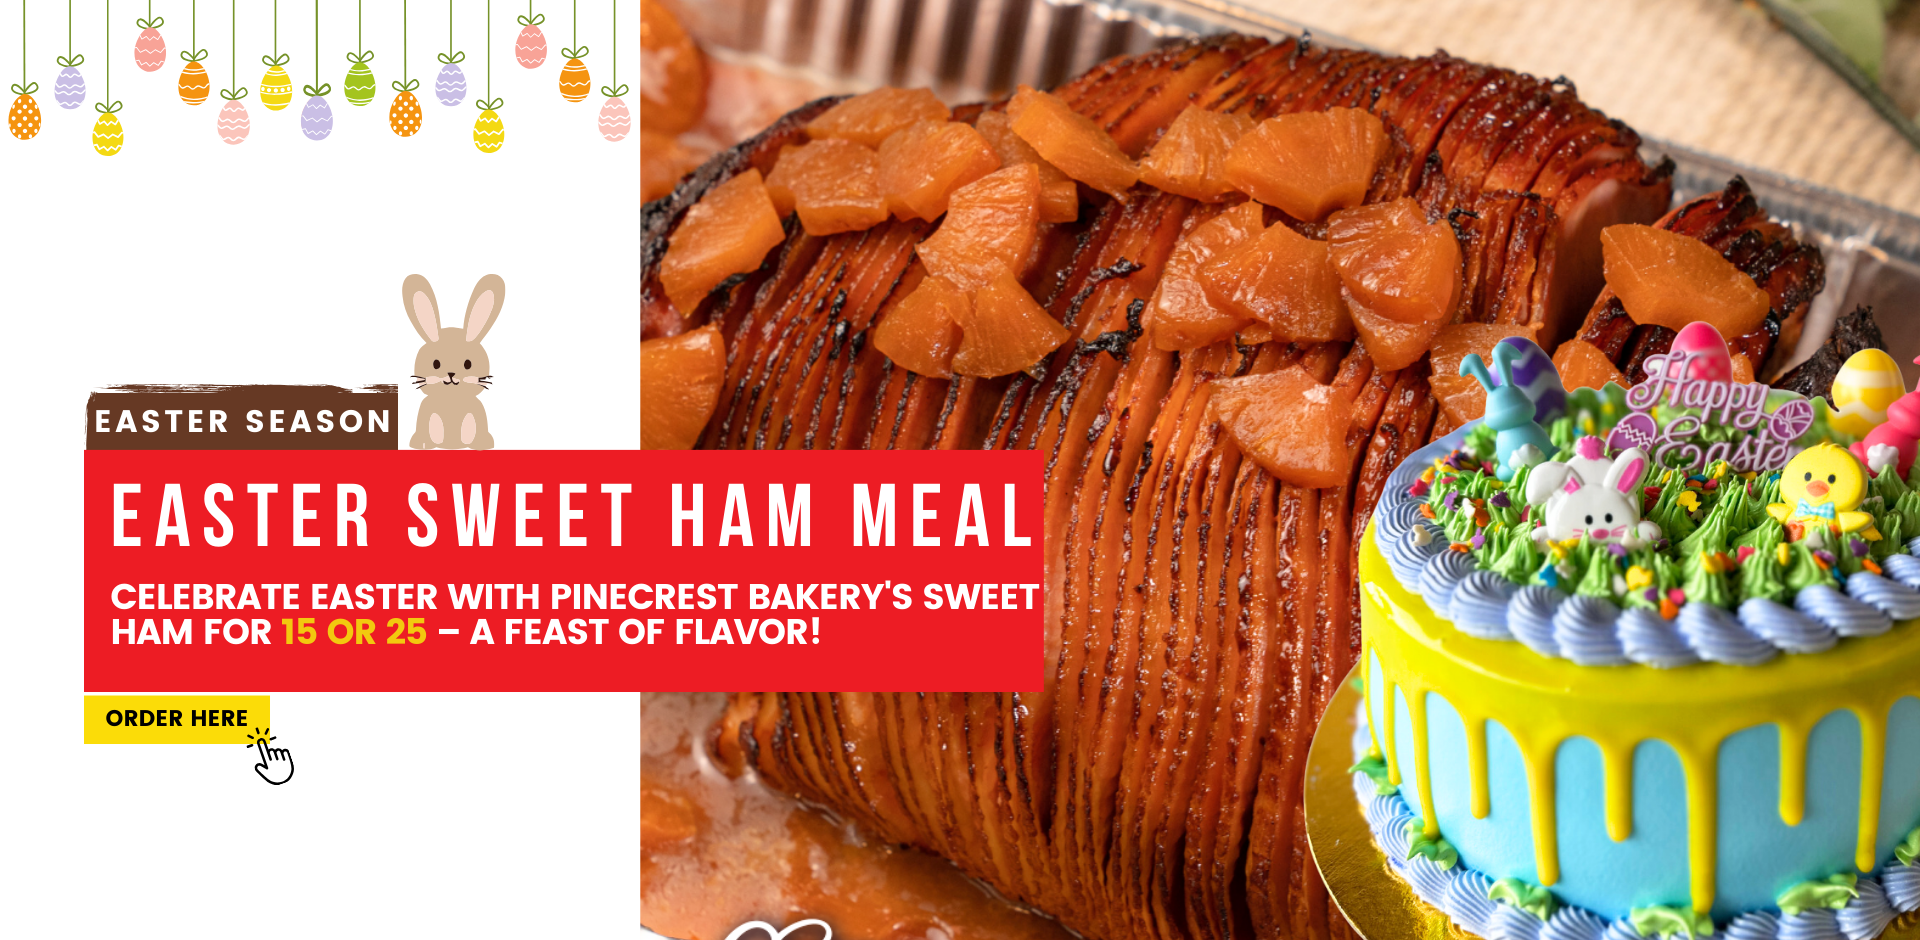 Easter season. Easter Sweet Ham Meal. Celebrate easter with Pinecrest Bakery's sweet ham for 15 or 25 – a feast of flavor! ORDER HERE